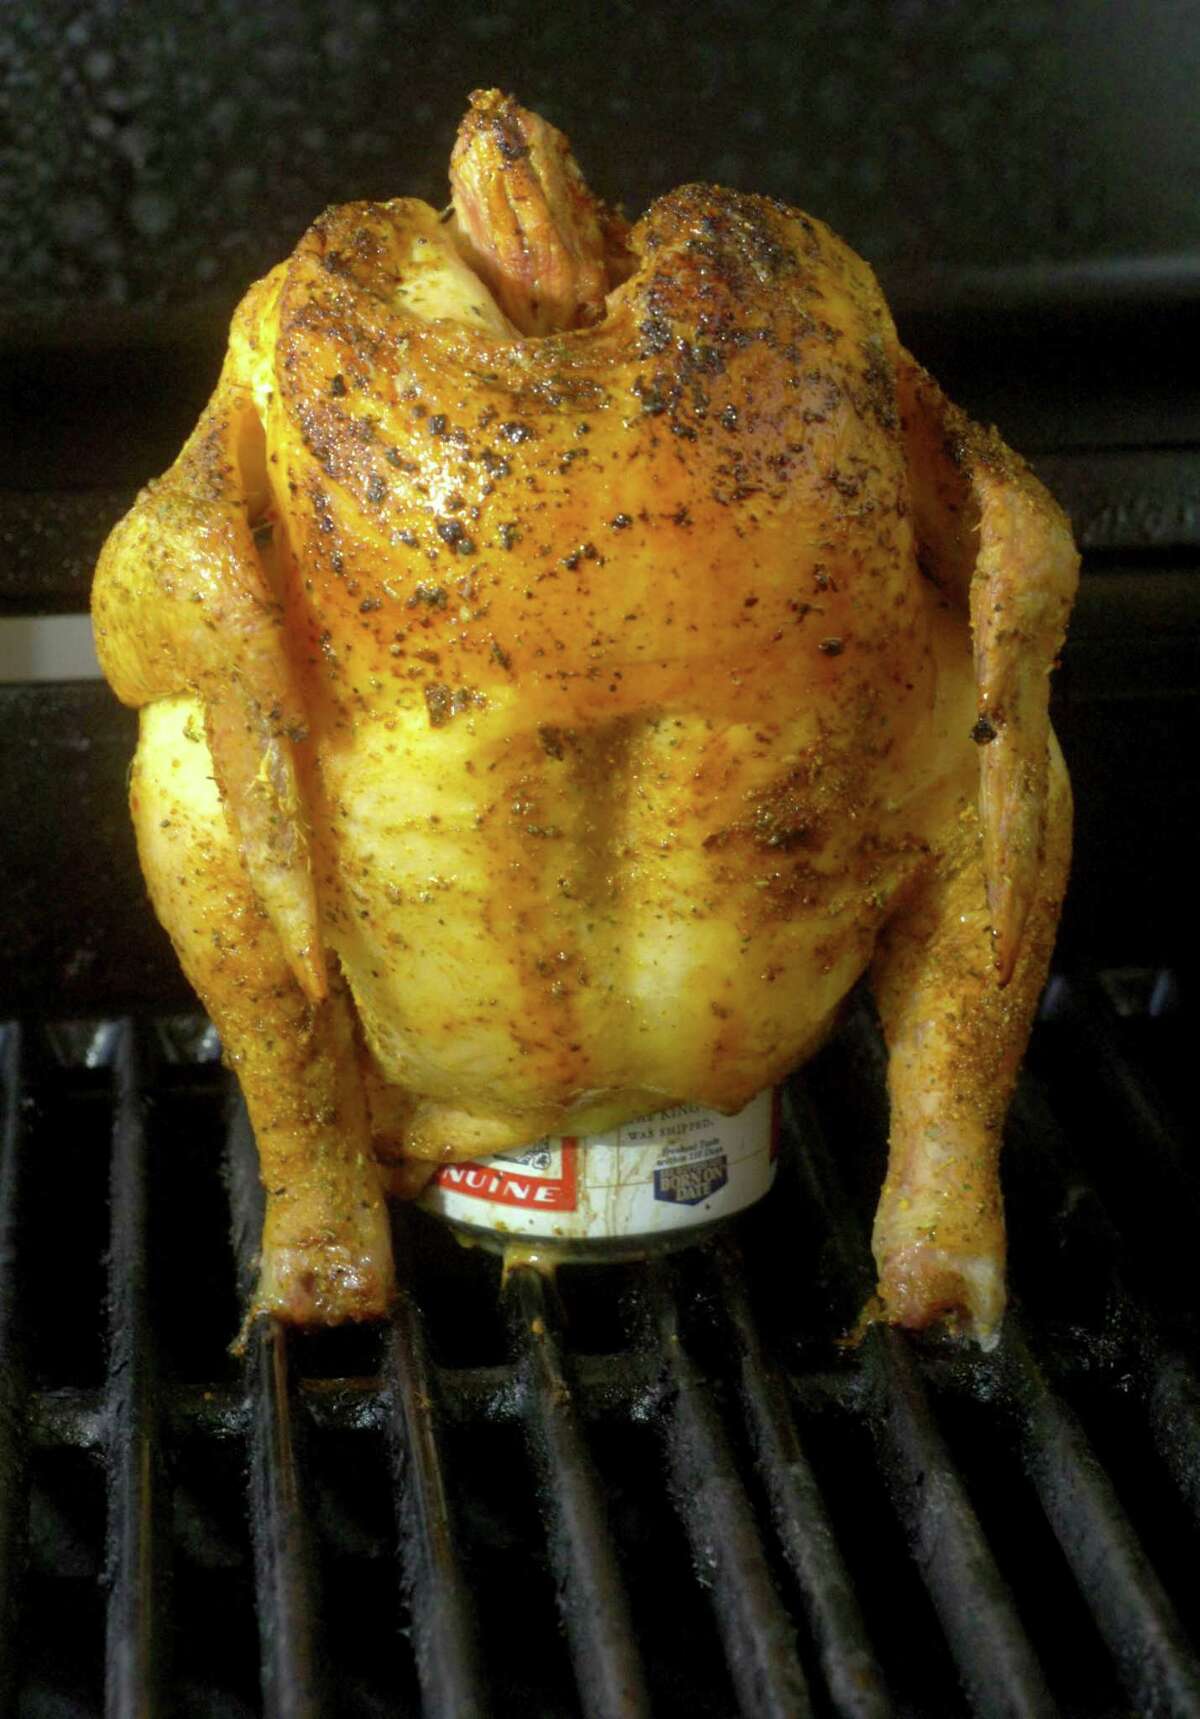 Beer can chicken roasted on the grill allows the heat to roast the bird evenly on all sides, but don’t expect to actually be able to taste the beer in the bird.